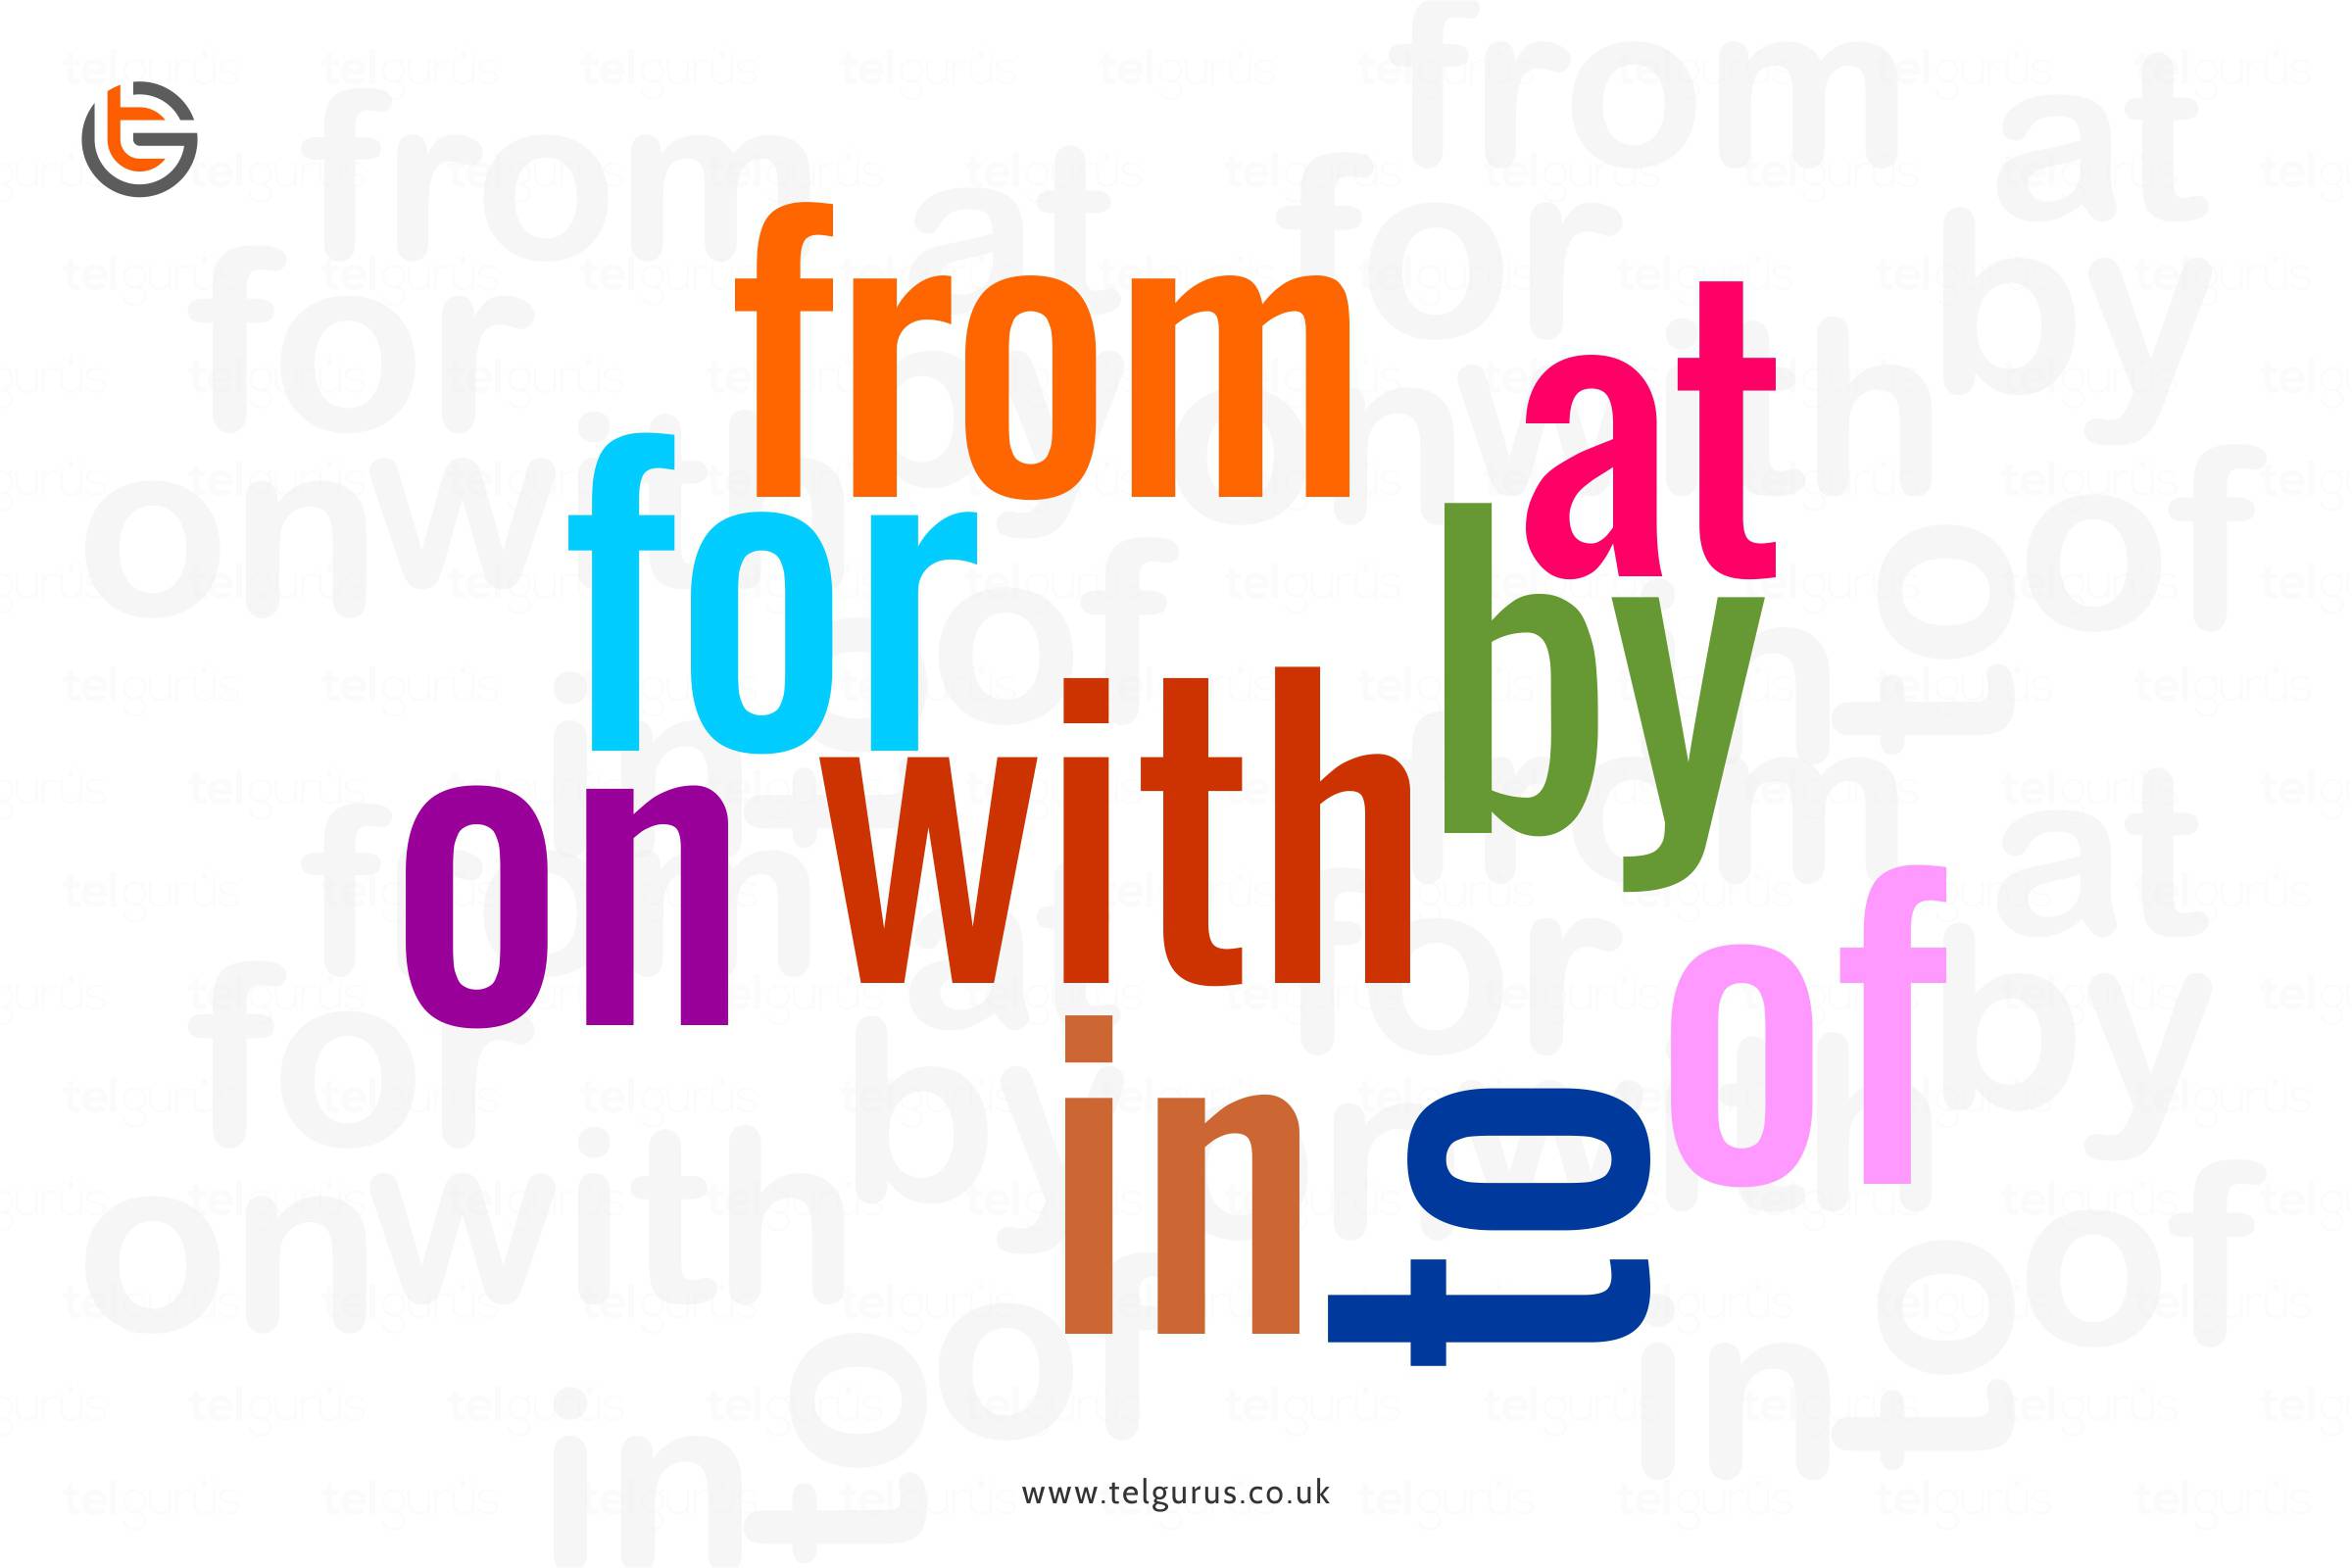 What is the use of prepositions in English?